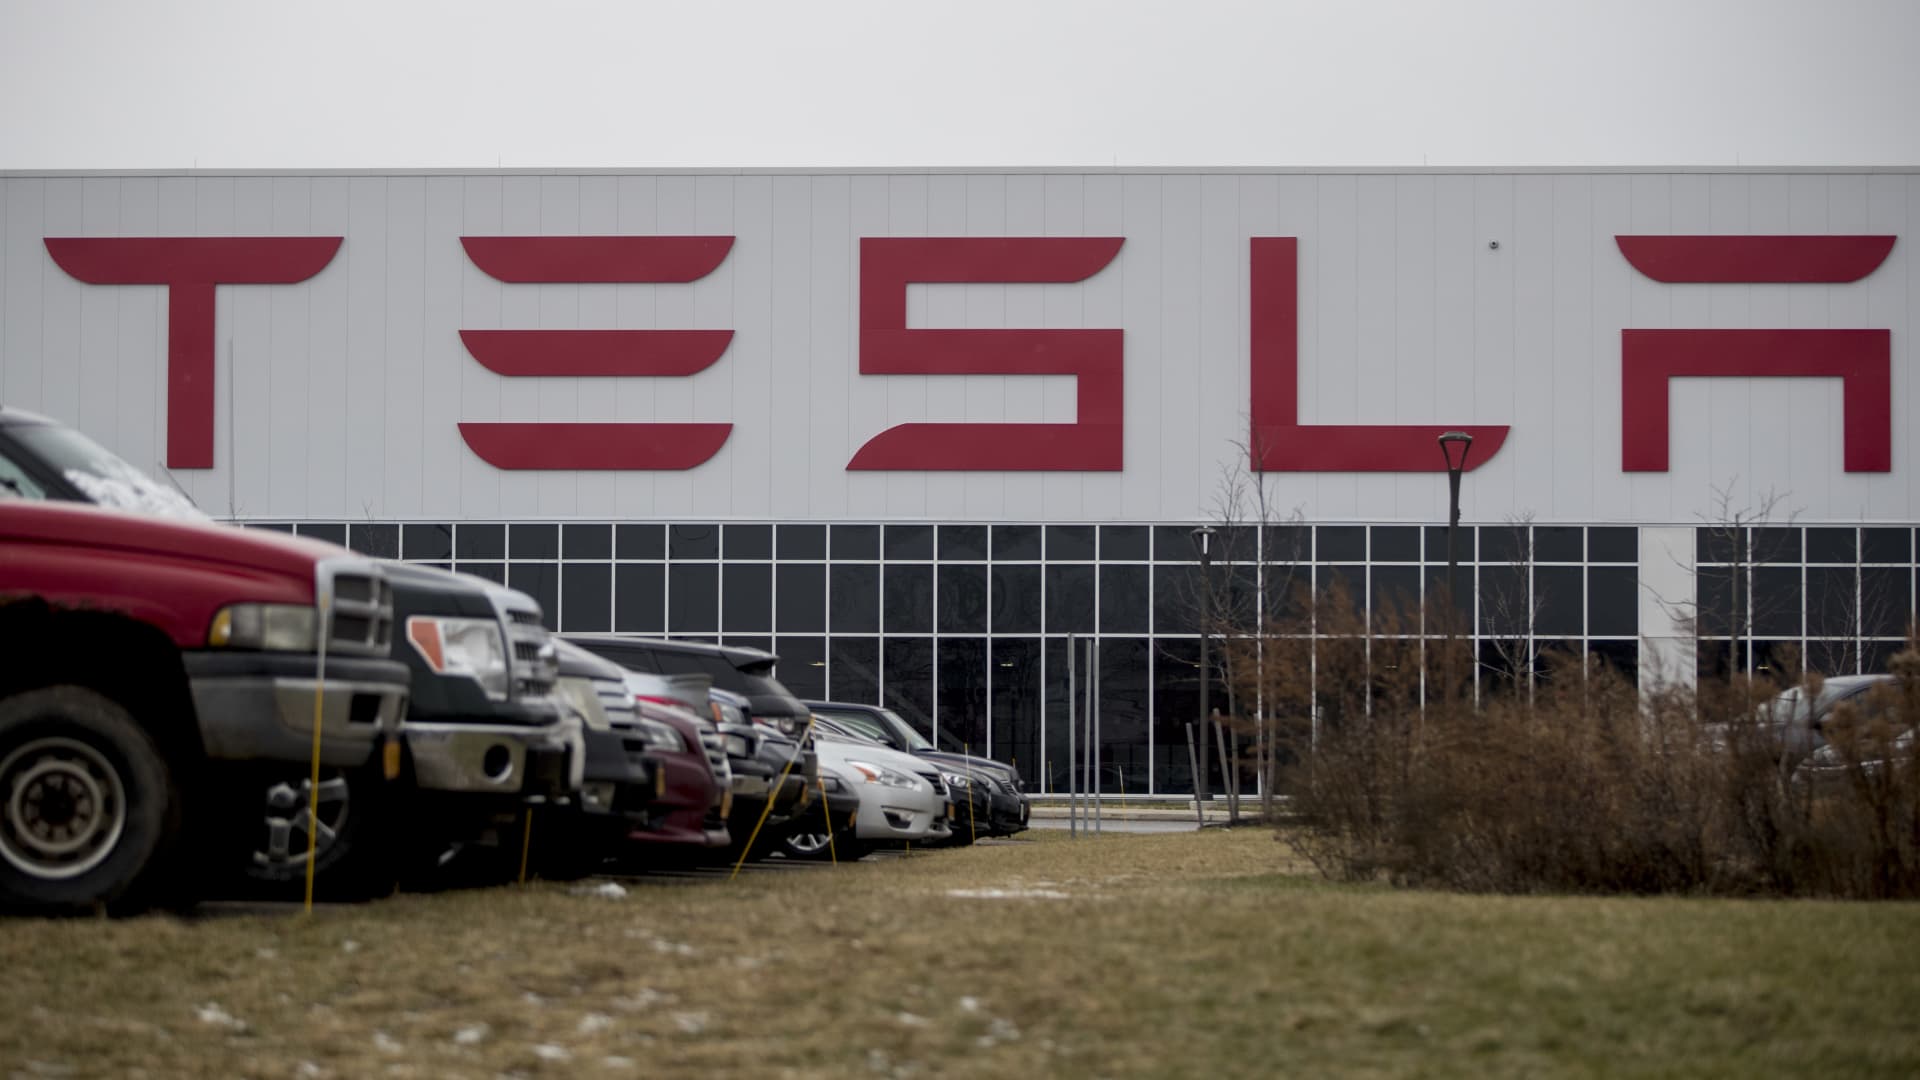 Tesla is laying off 285 employees in Buffalo, New York as part of a broad restructuring - CNBC image